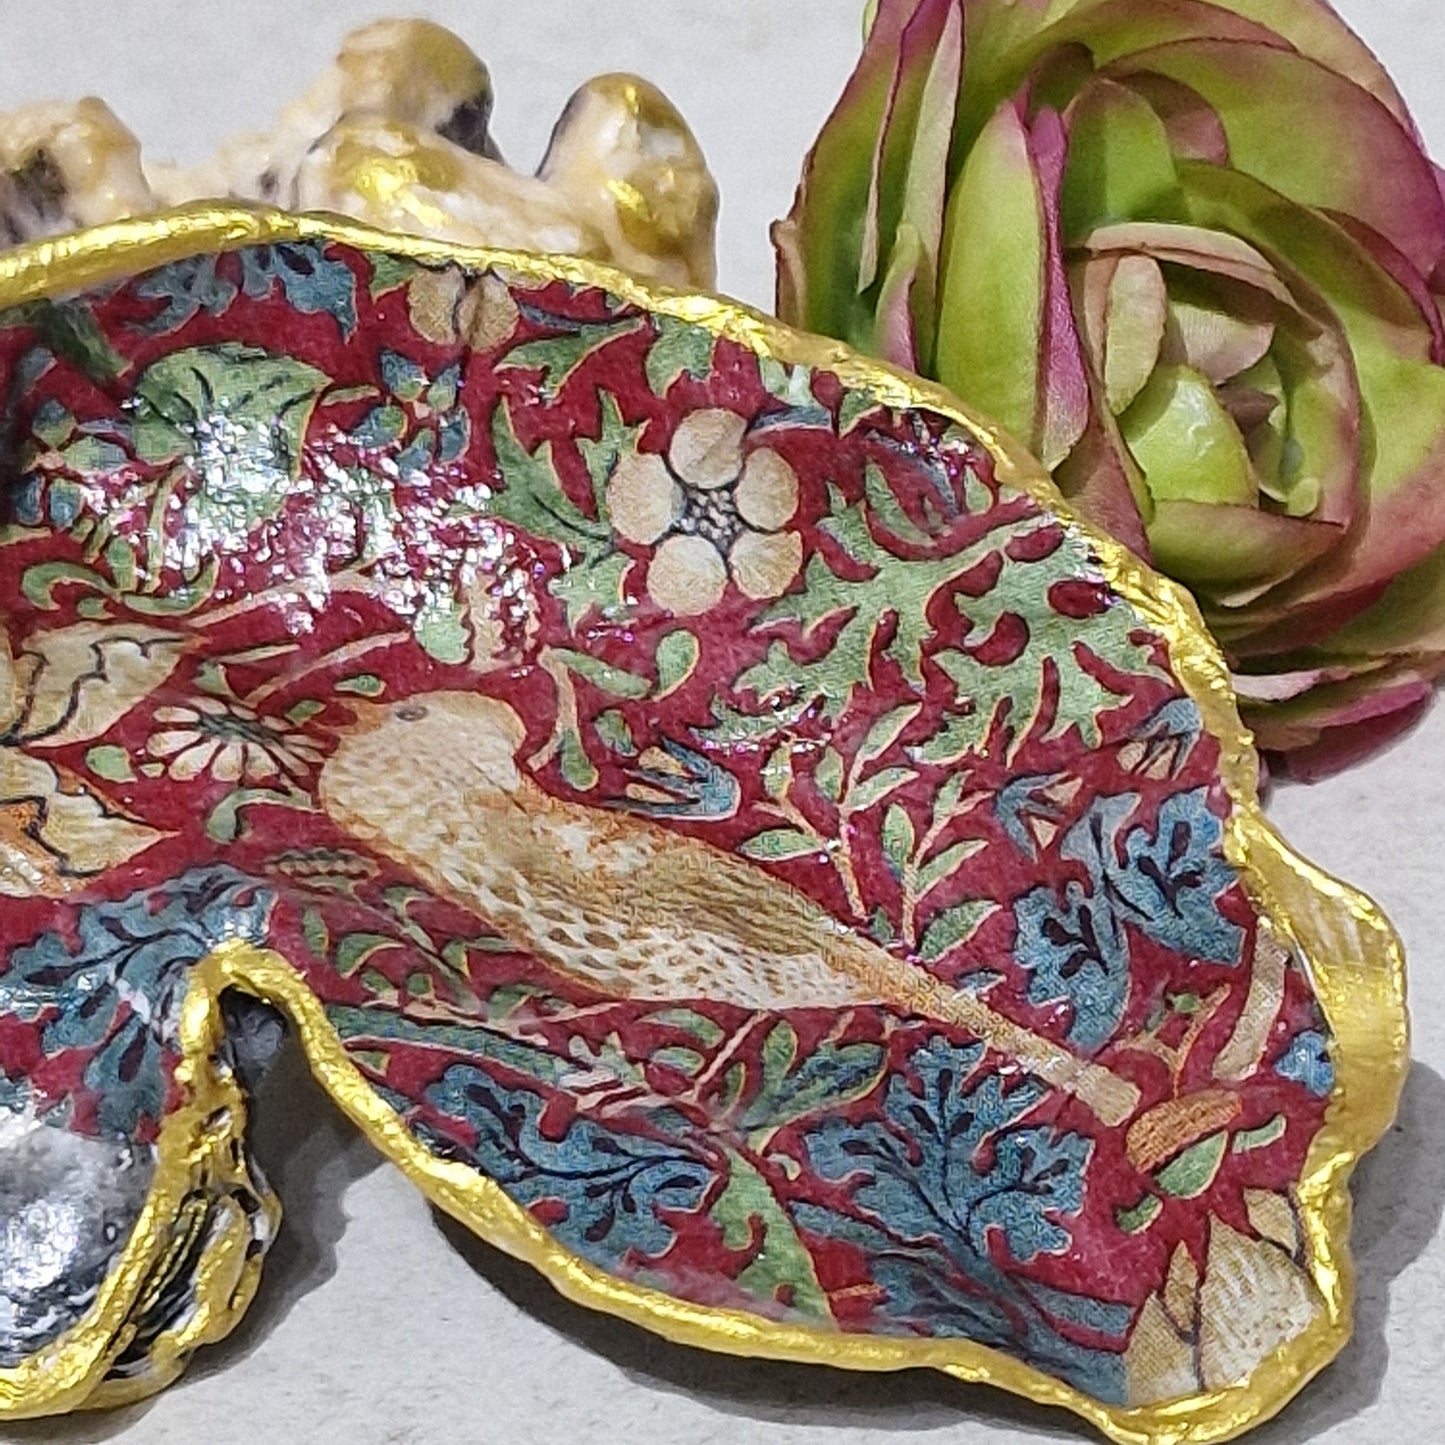 William Morris Strawberry Thief Red Oyster Shell Trinket Dish Gift V&A Museum